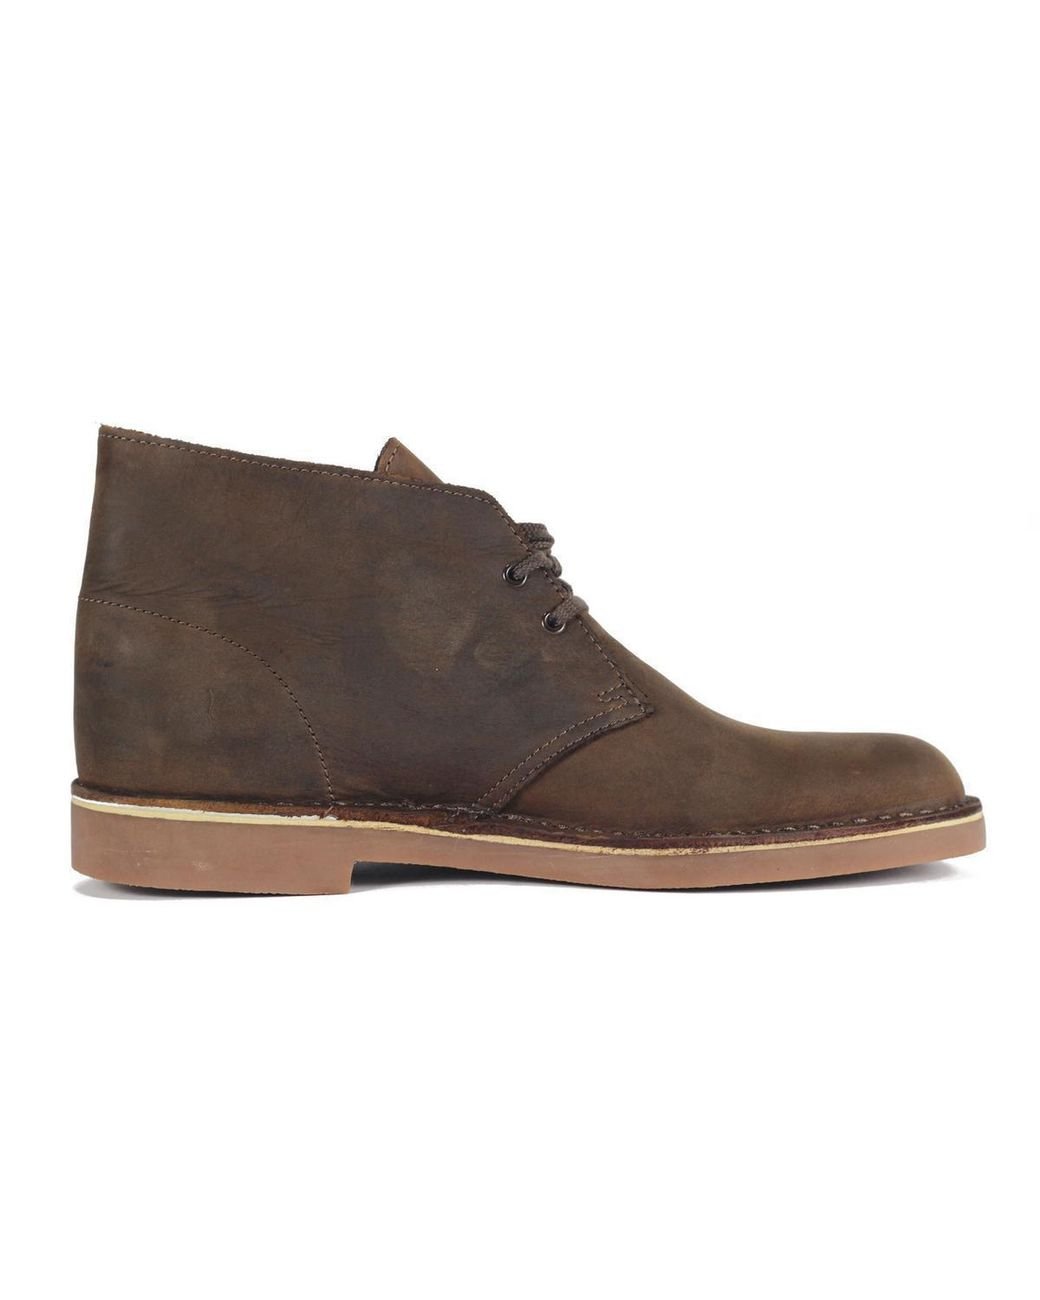 Clarks Bushacre 2 Beeswax Boot in Brown 